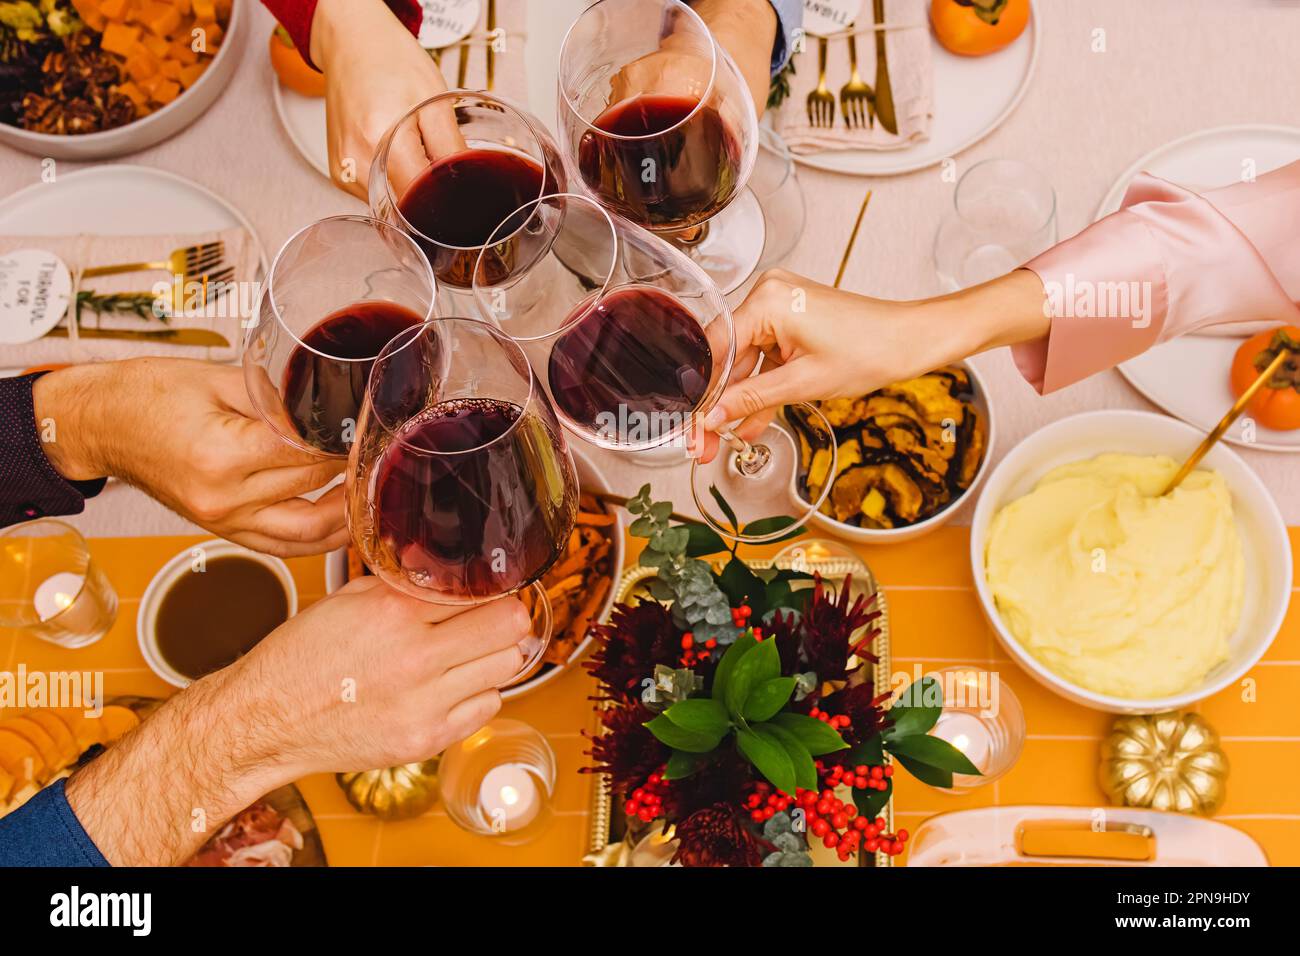 Unrecognizable people clinking with a glasses filled with red wine sitting at the Thanksgiving dinner table. Celebration, gather, Friendsgiving Stock Photo